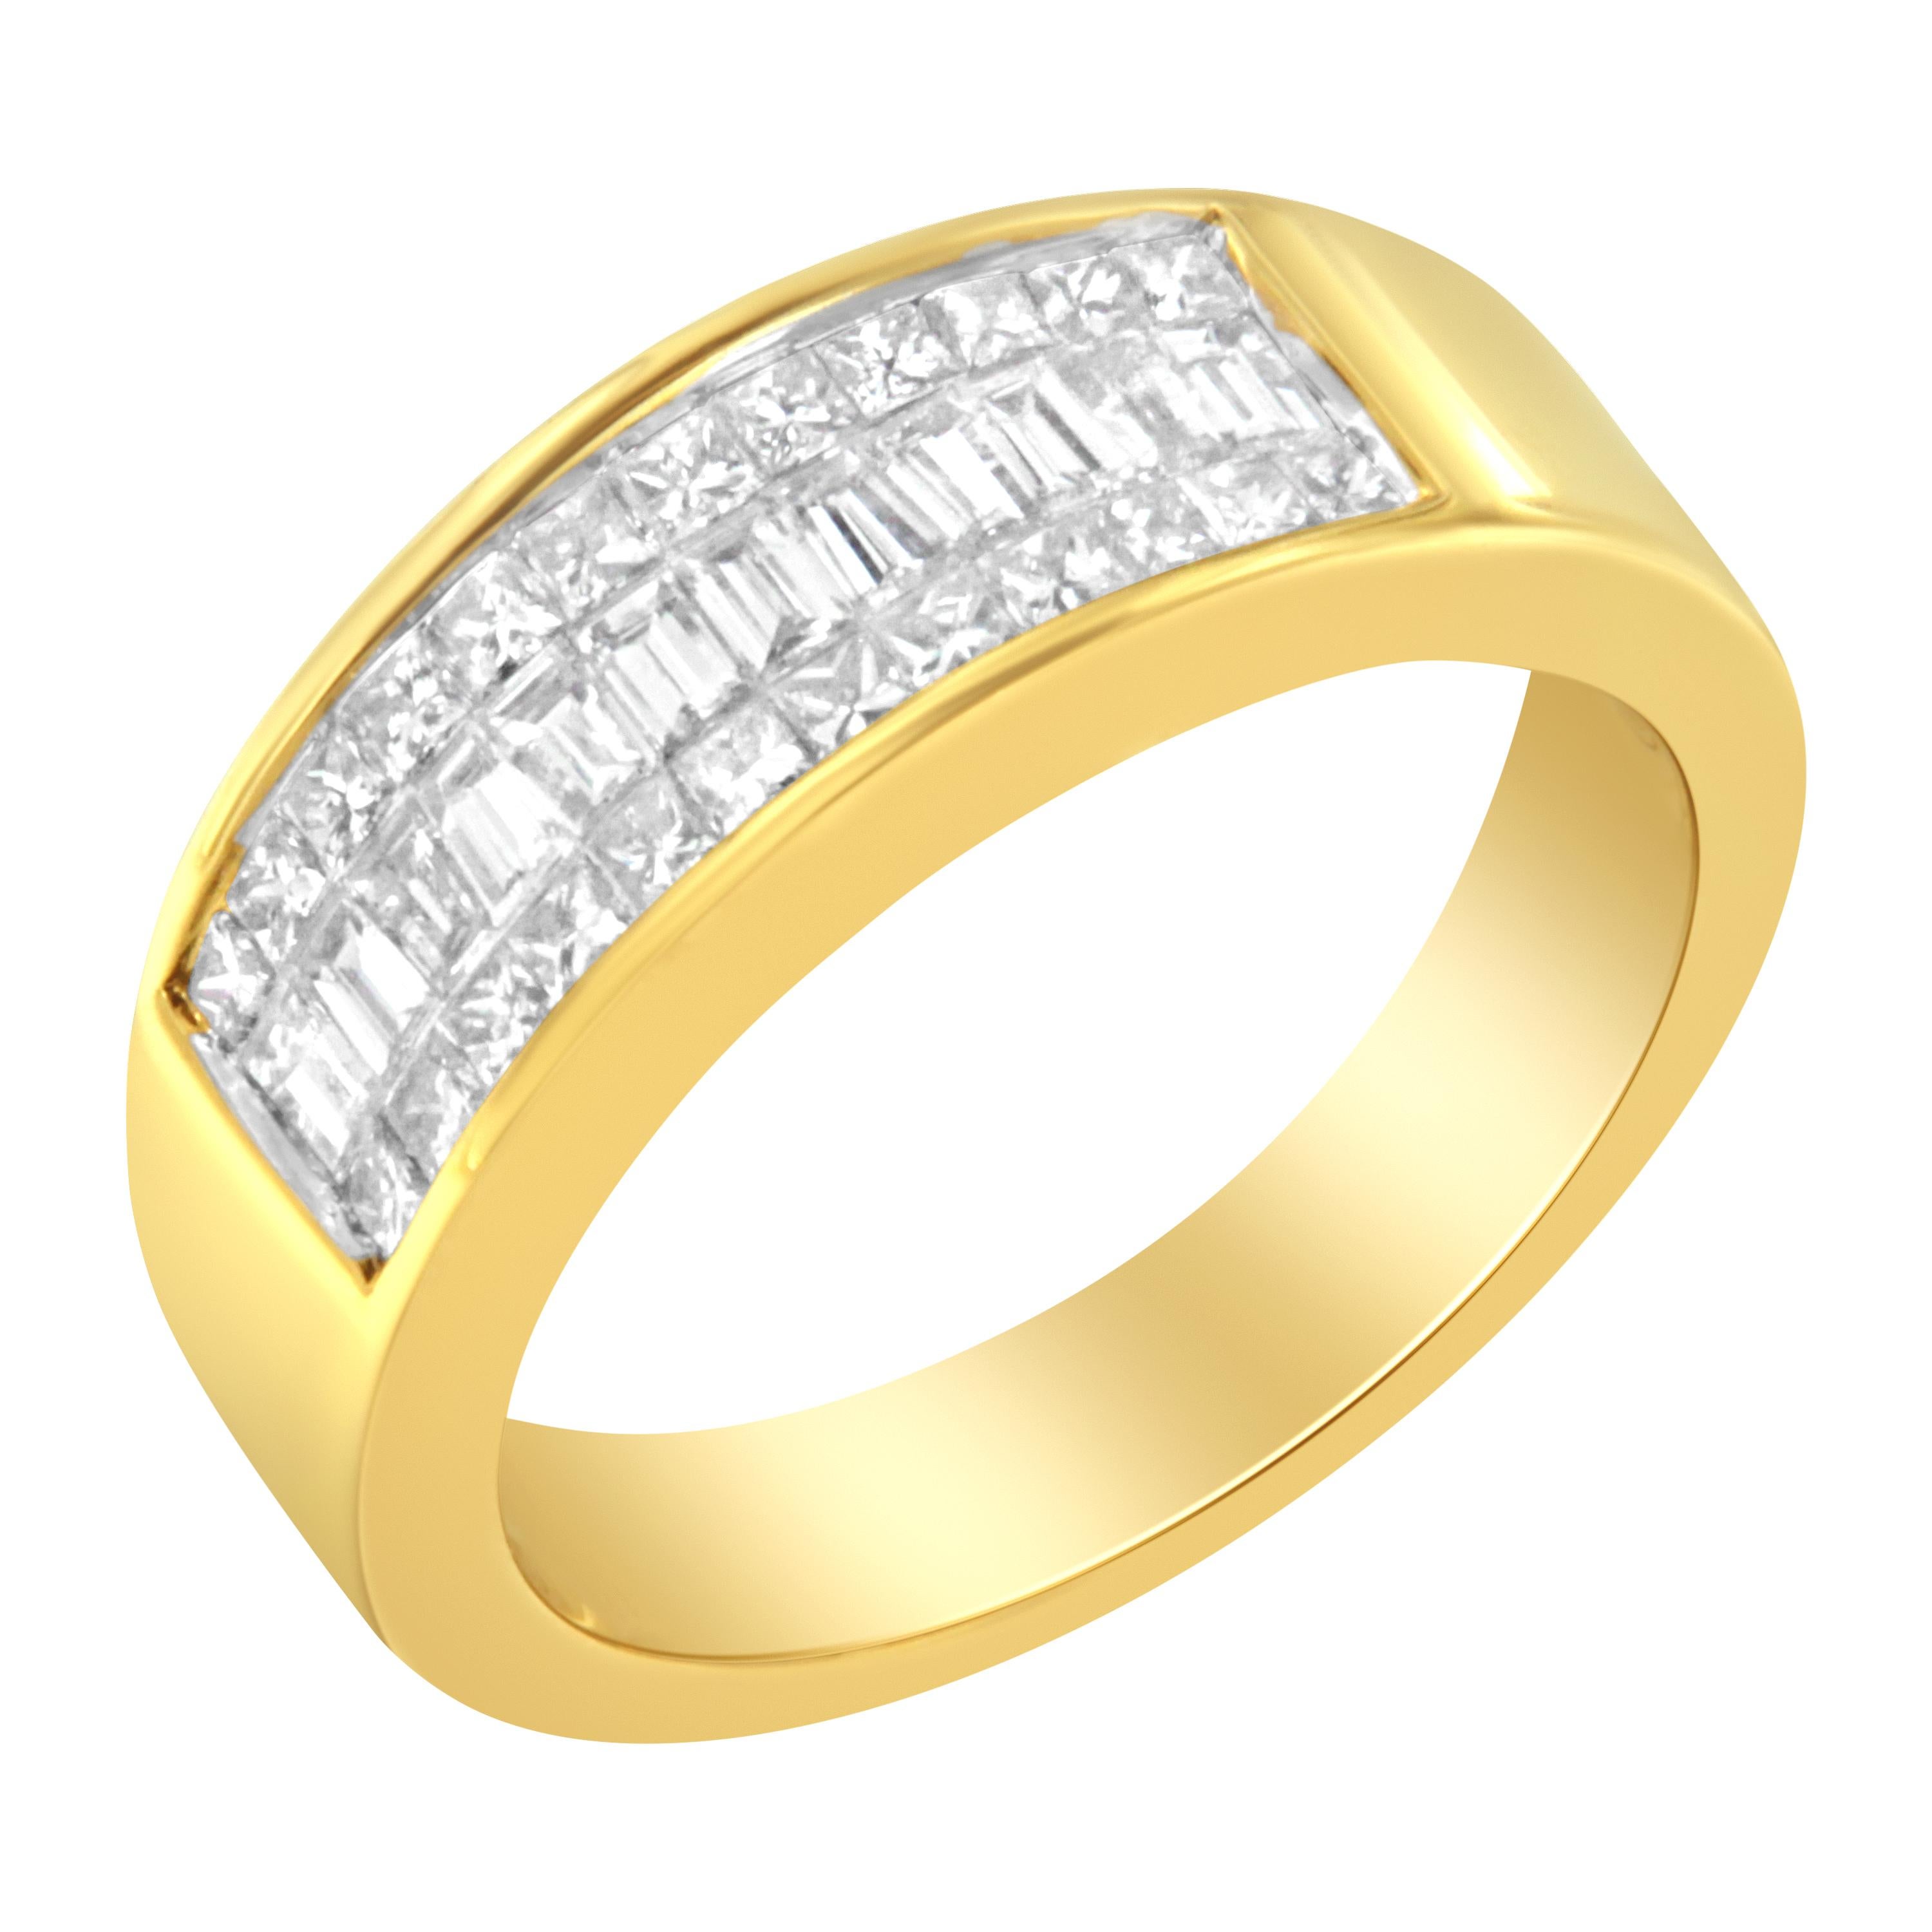 A triple row of glittering princess and baguette-cut diamonds adorn this gorgeous ring design. Crafted in polished warm 14k yellow gold, this band ring showcases 38 natural, sparkling diamonds channel set in three rows for a total carat weight of